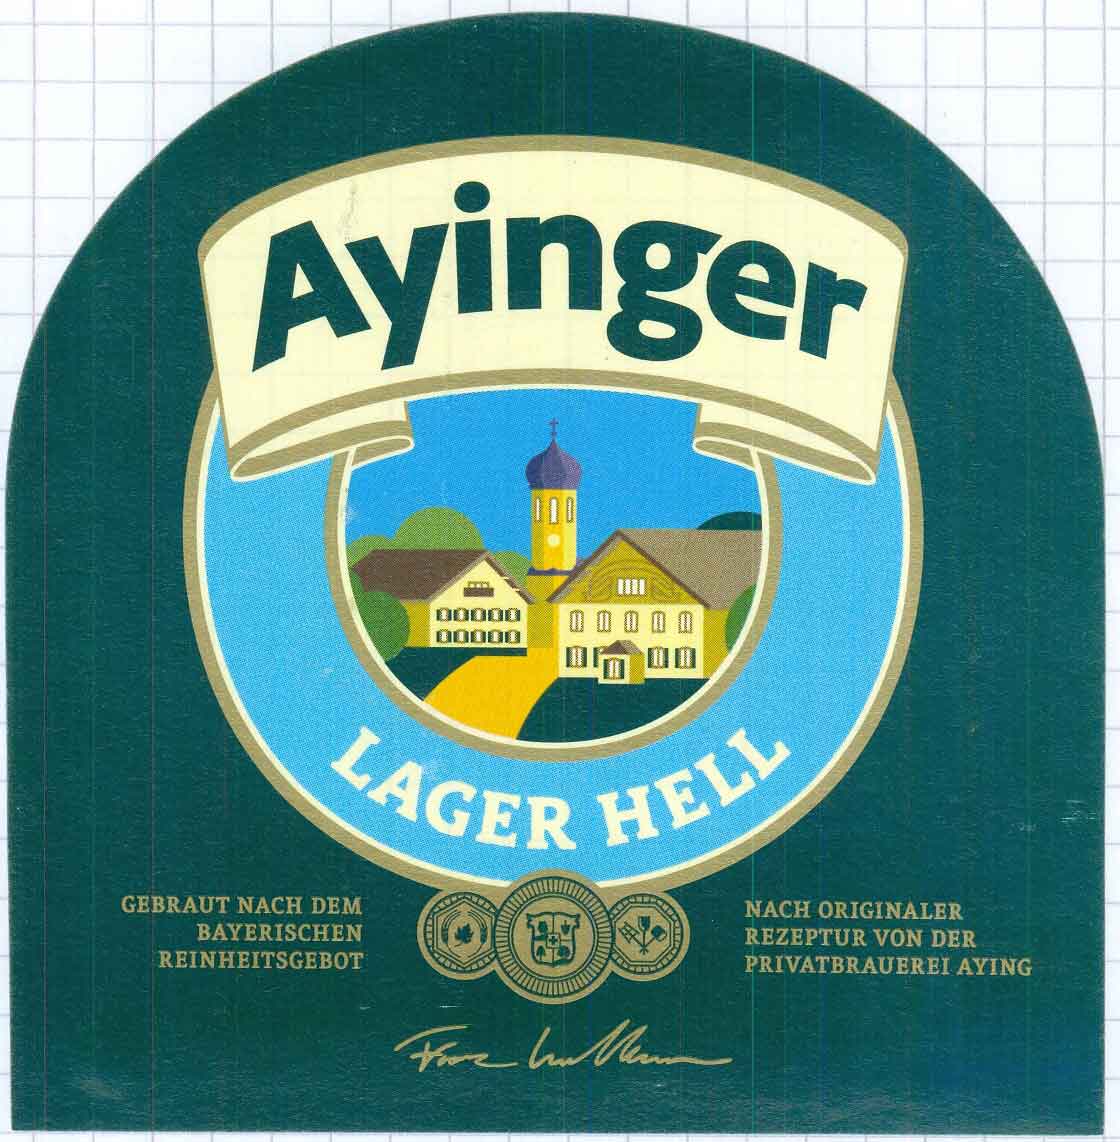 Ayinger Logo - Beer Of The Week # 14 // Ayinger Lager Hell